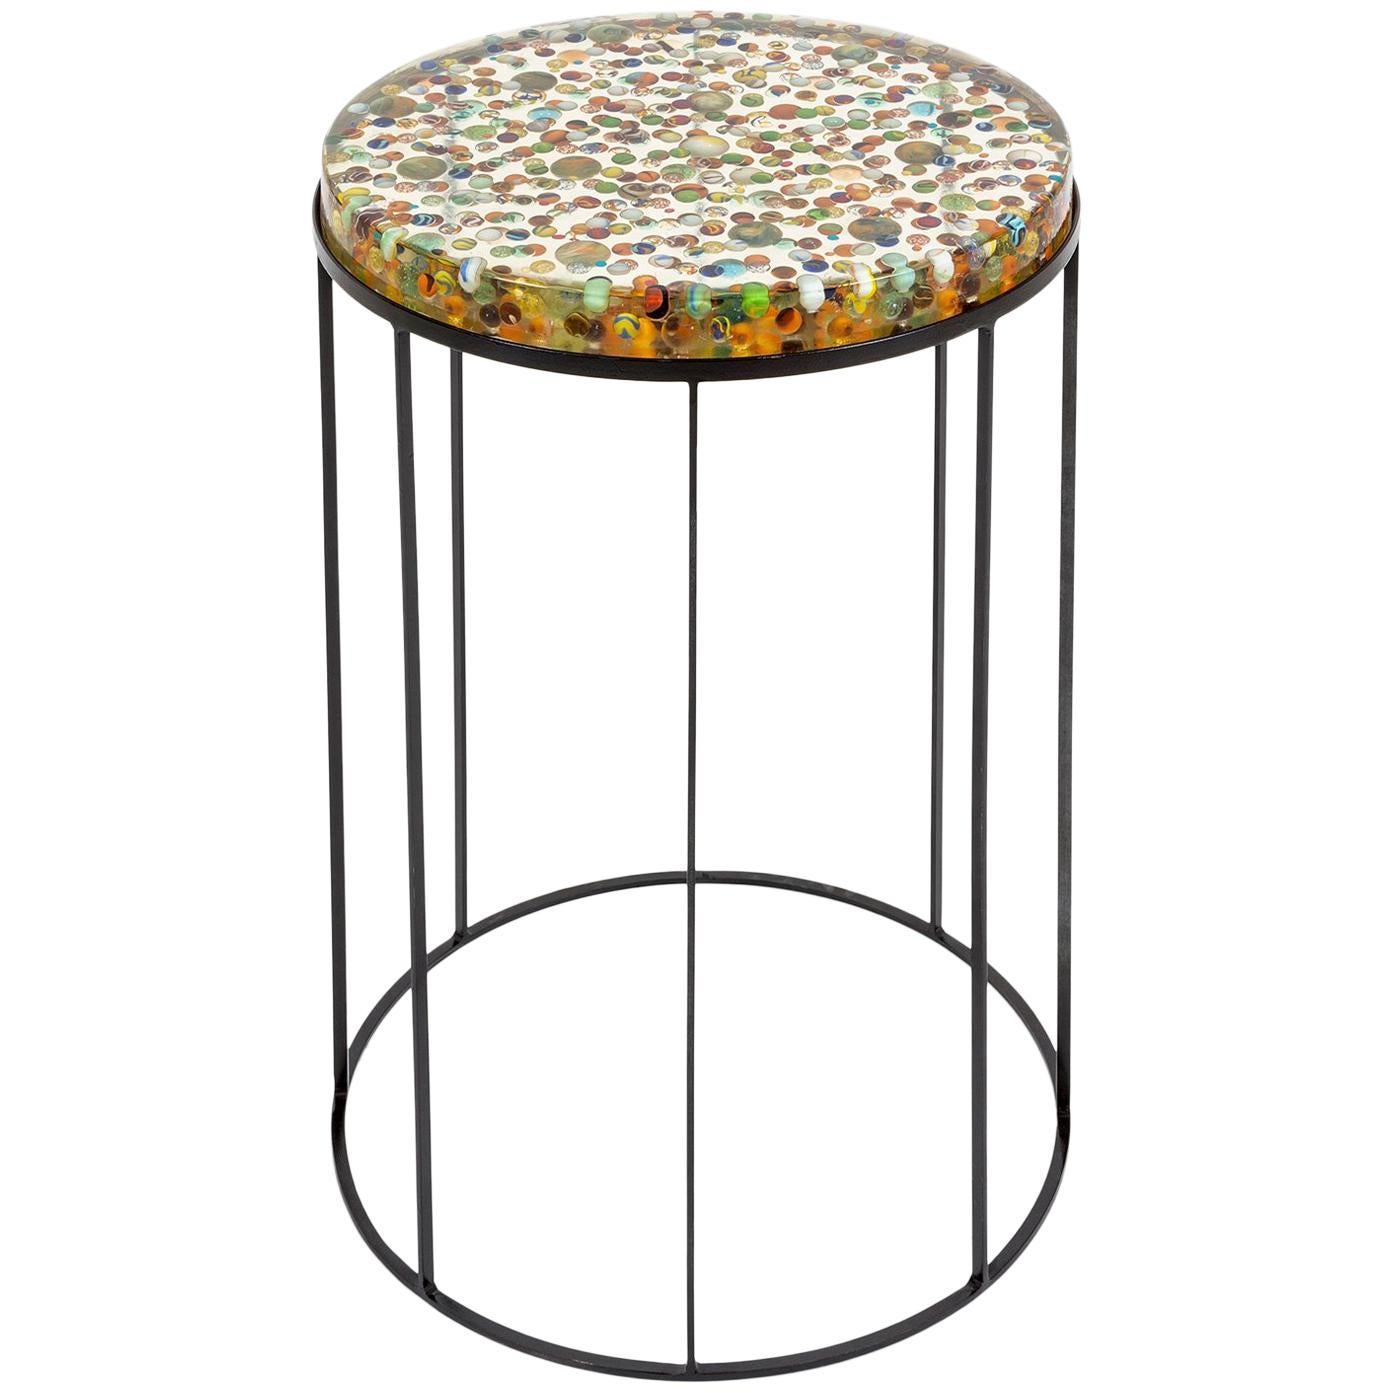 Biglie Side Table in Multicolor Resin and Metal by Emanuela Crotti